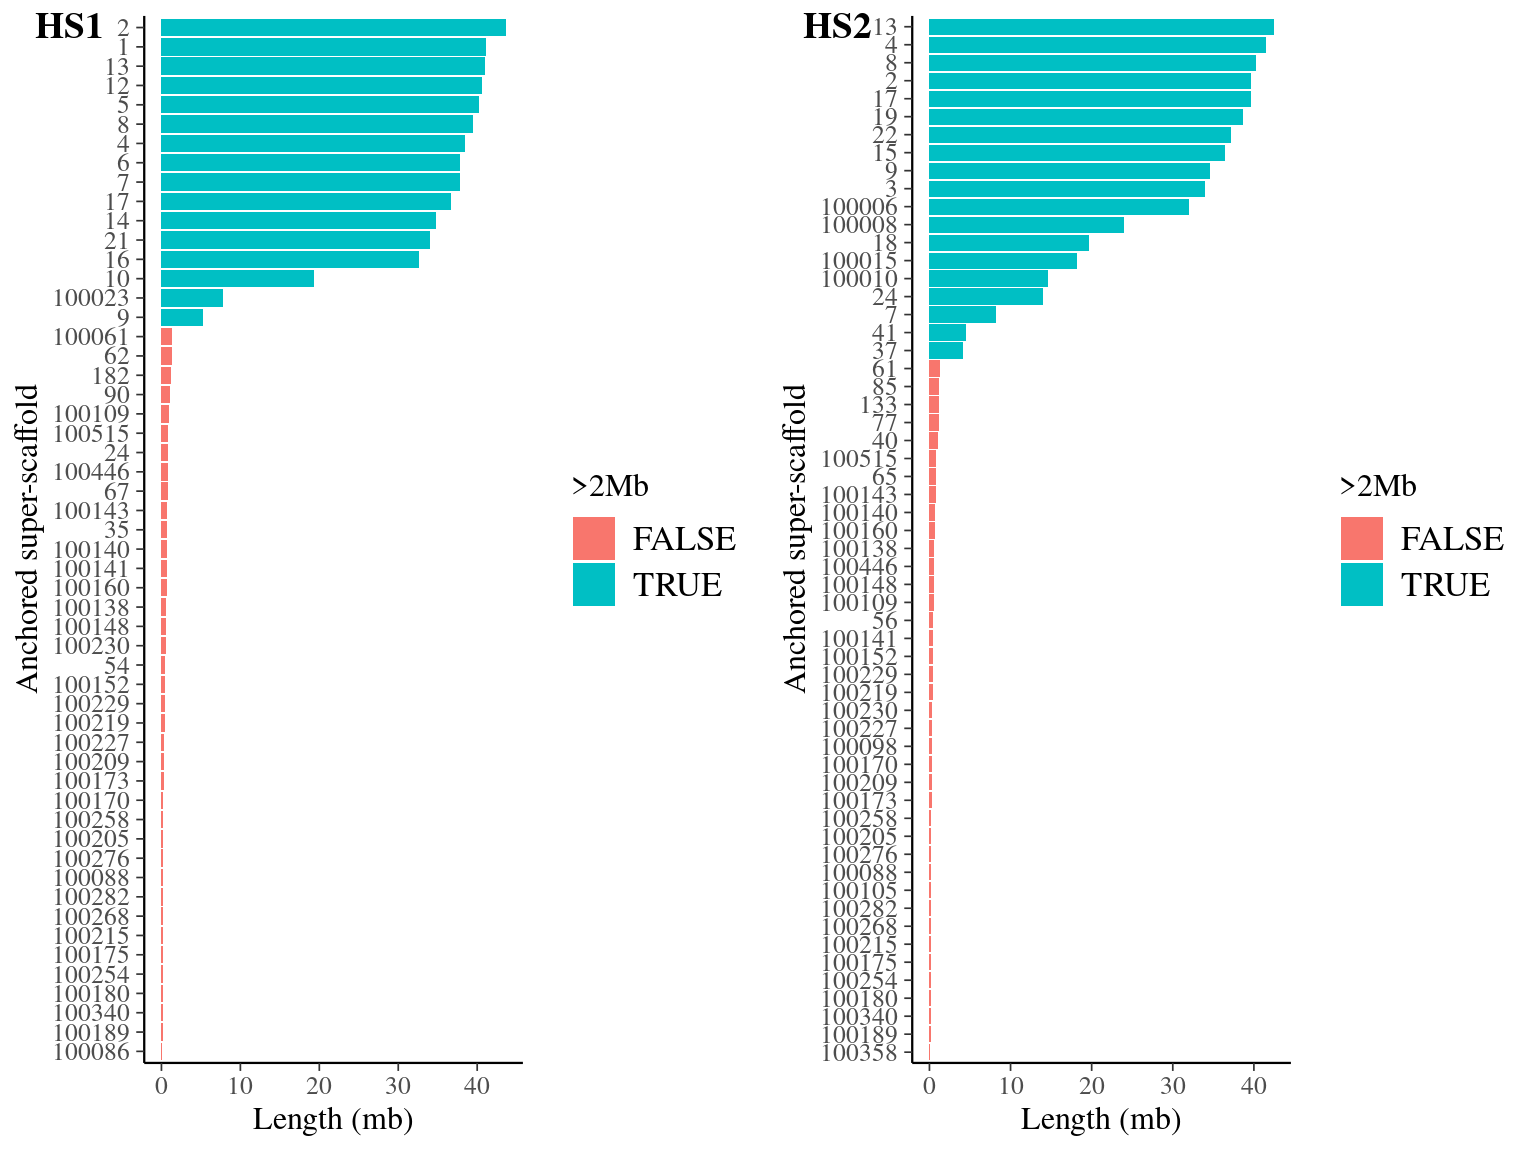 Anchored scaffolds size-distribution for haplotypes HS1 and HS2 in Angela's genome.